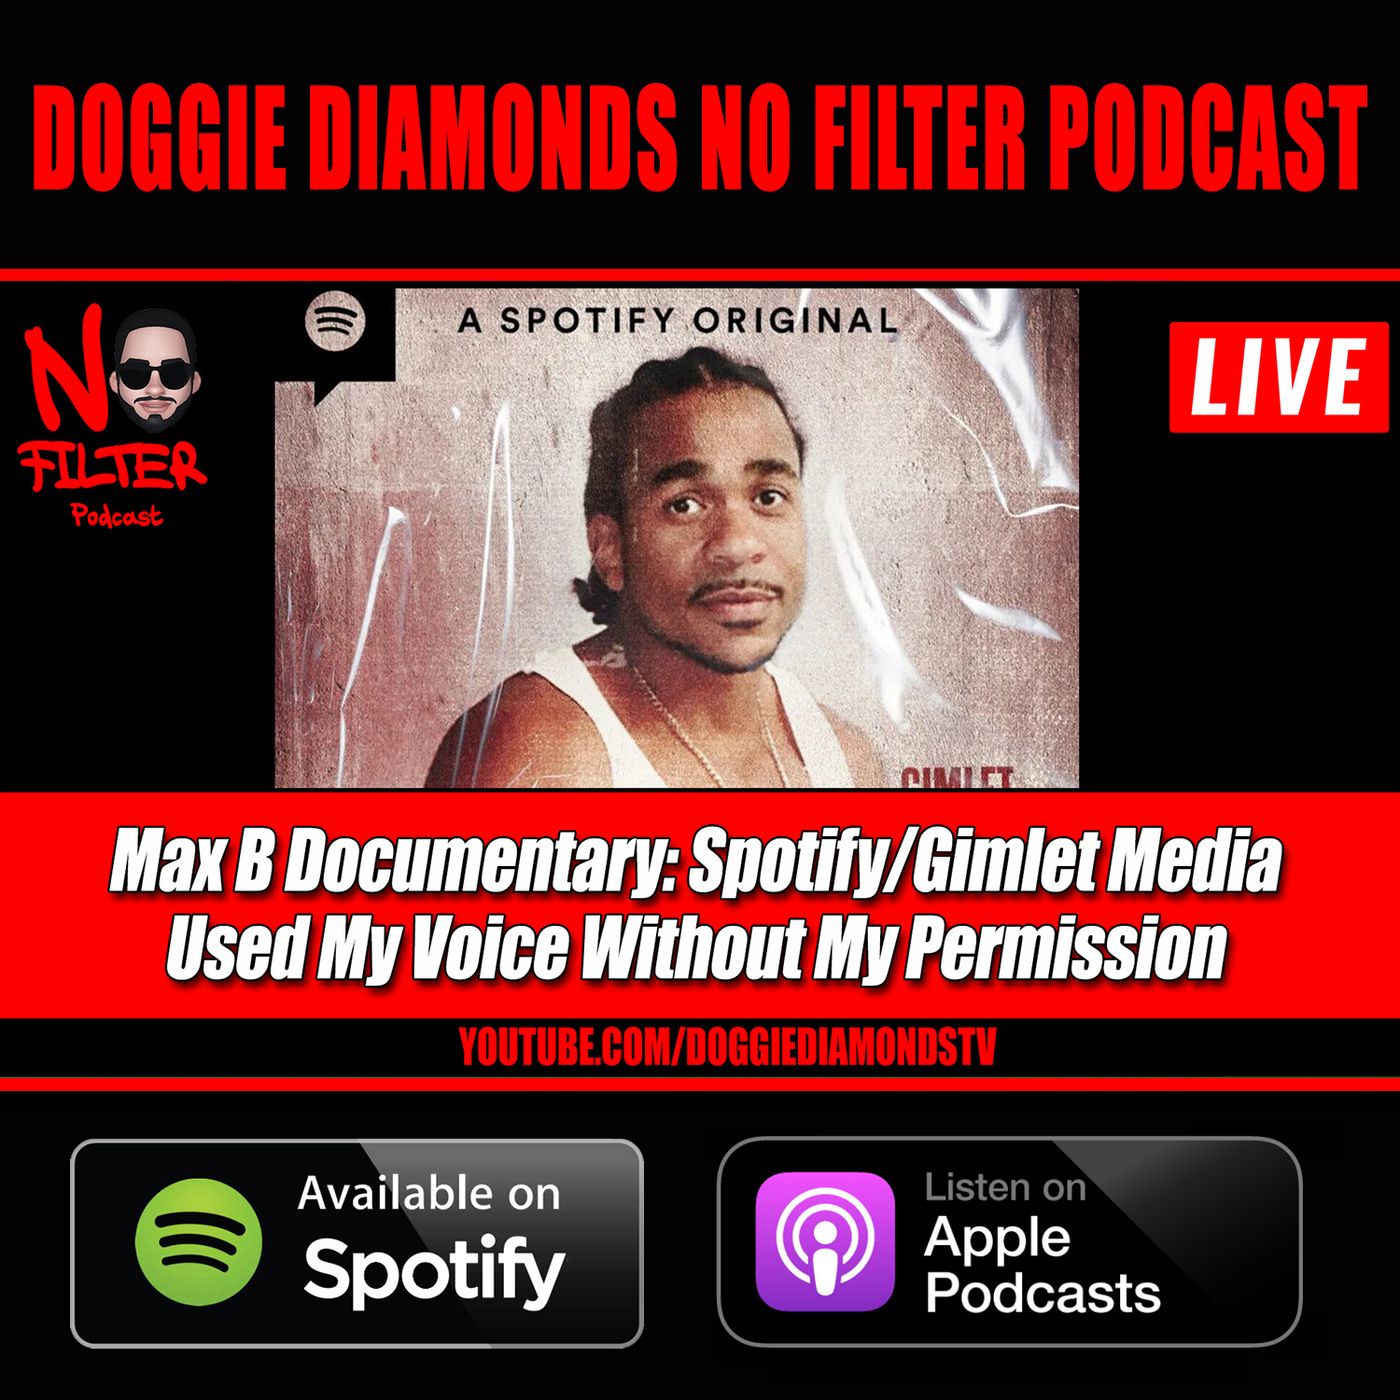 Max B Documentary: Spotify/Gimlet Media Used My Voice Without My Permission